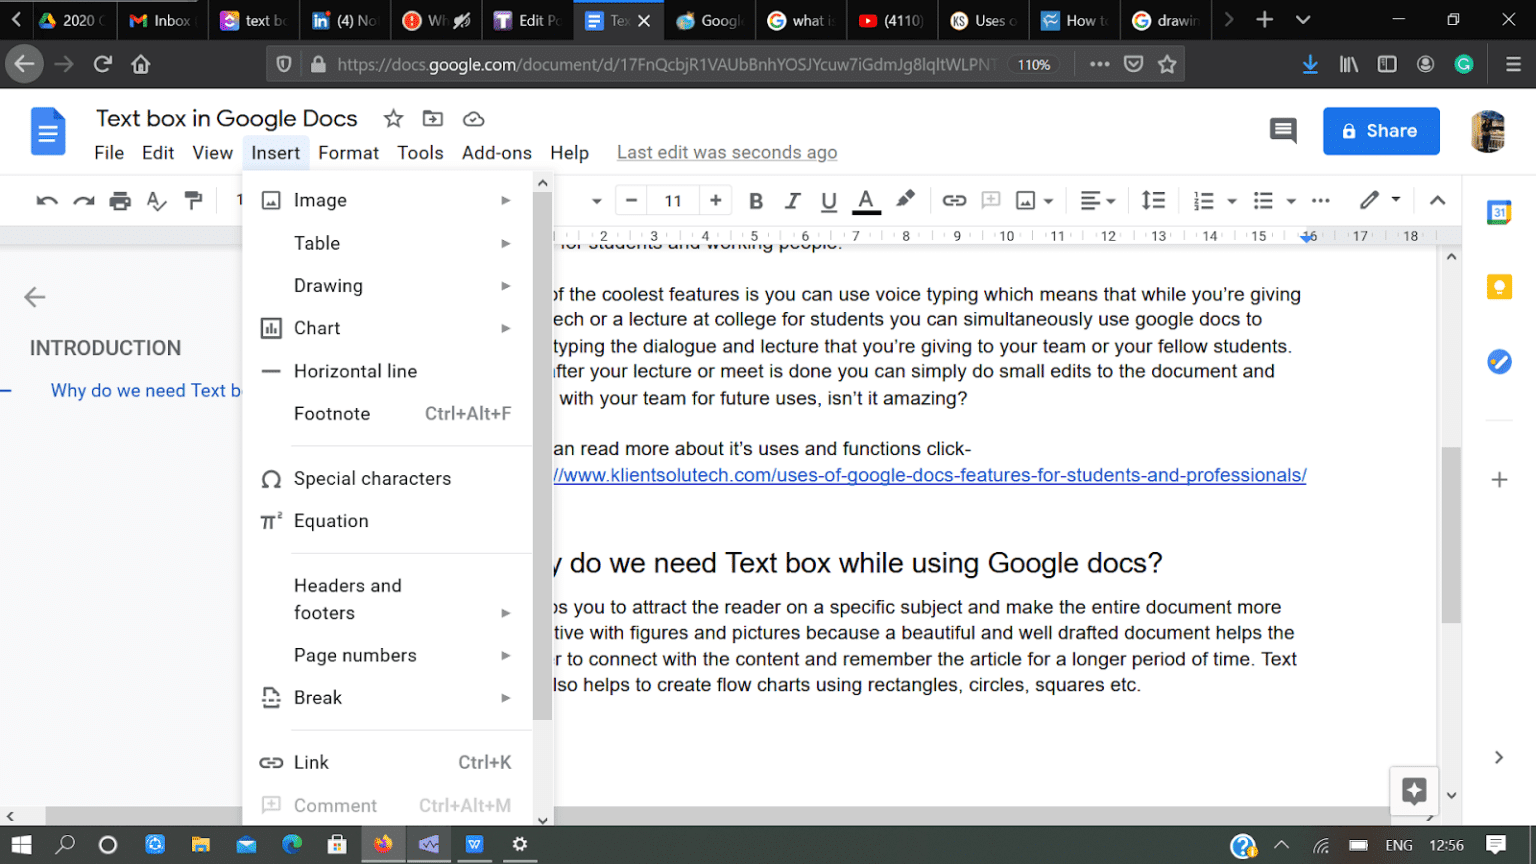 A custom template created using text boxes in Google Docs